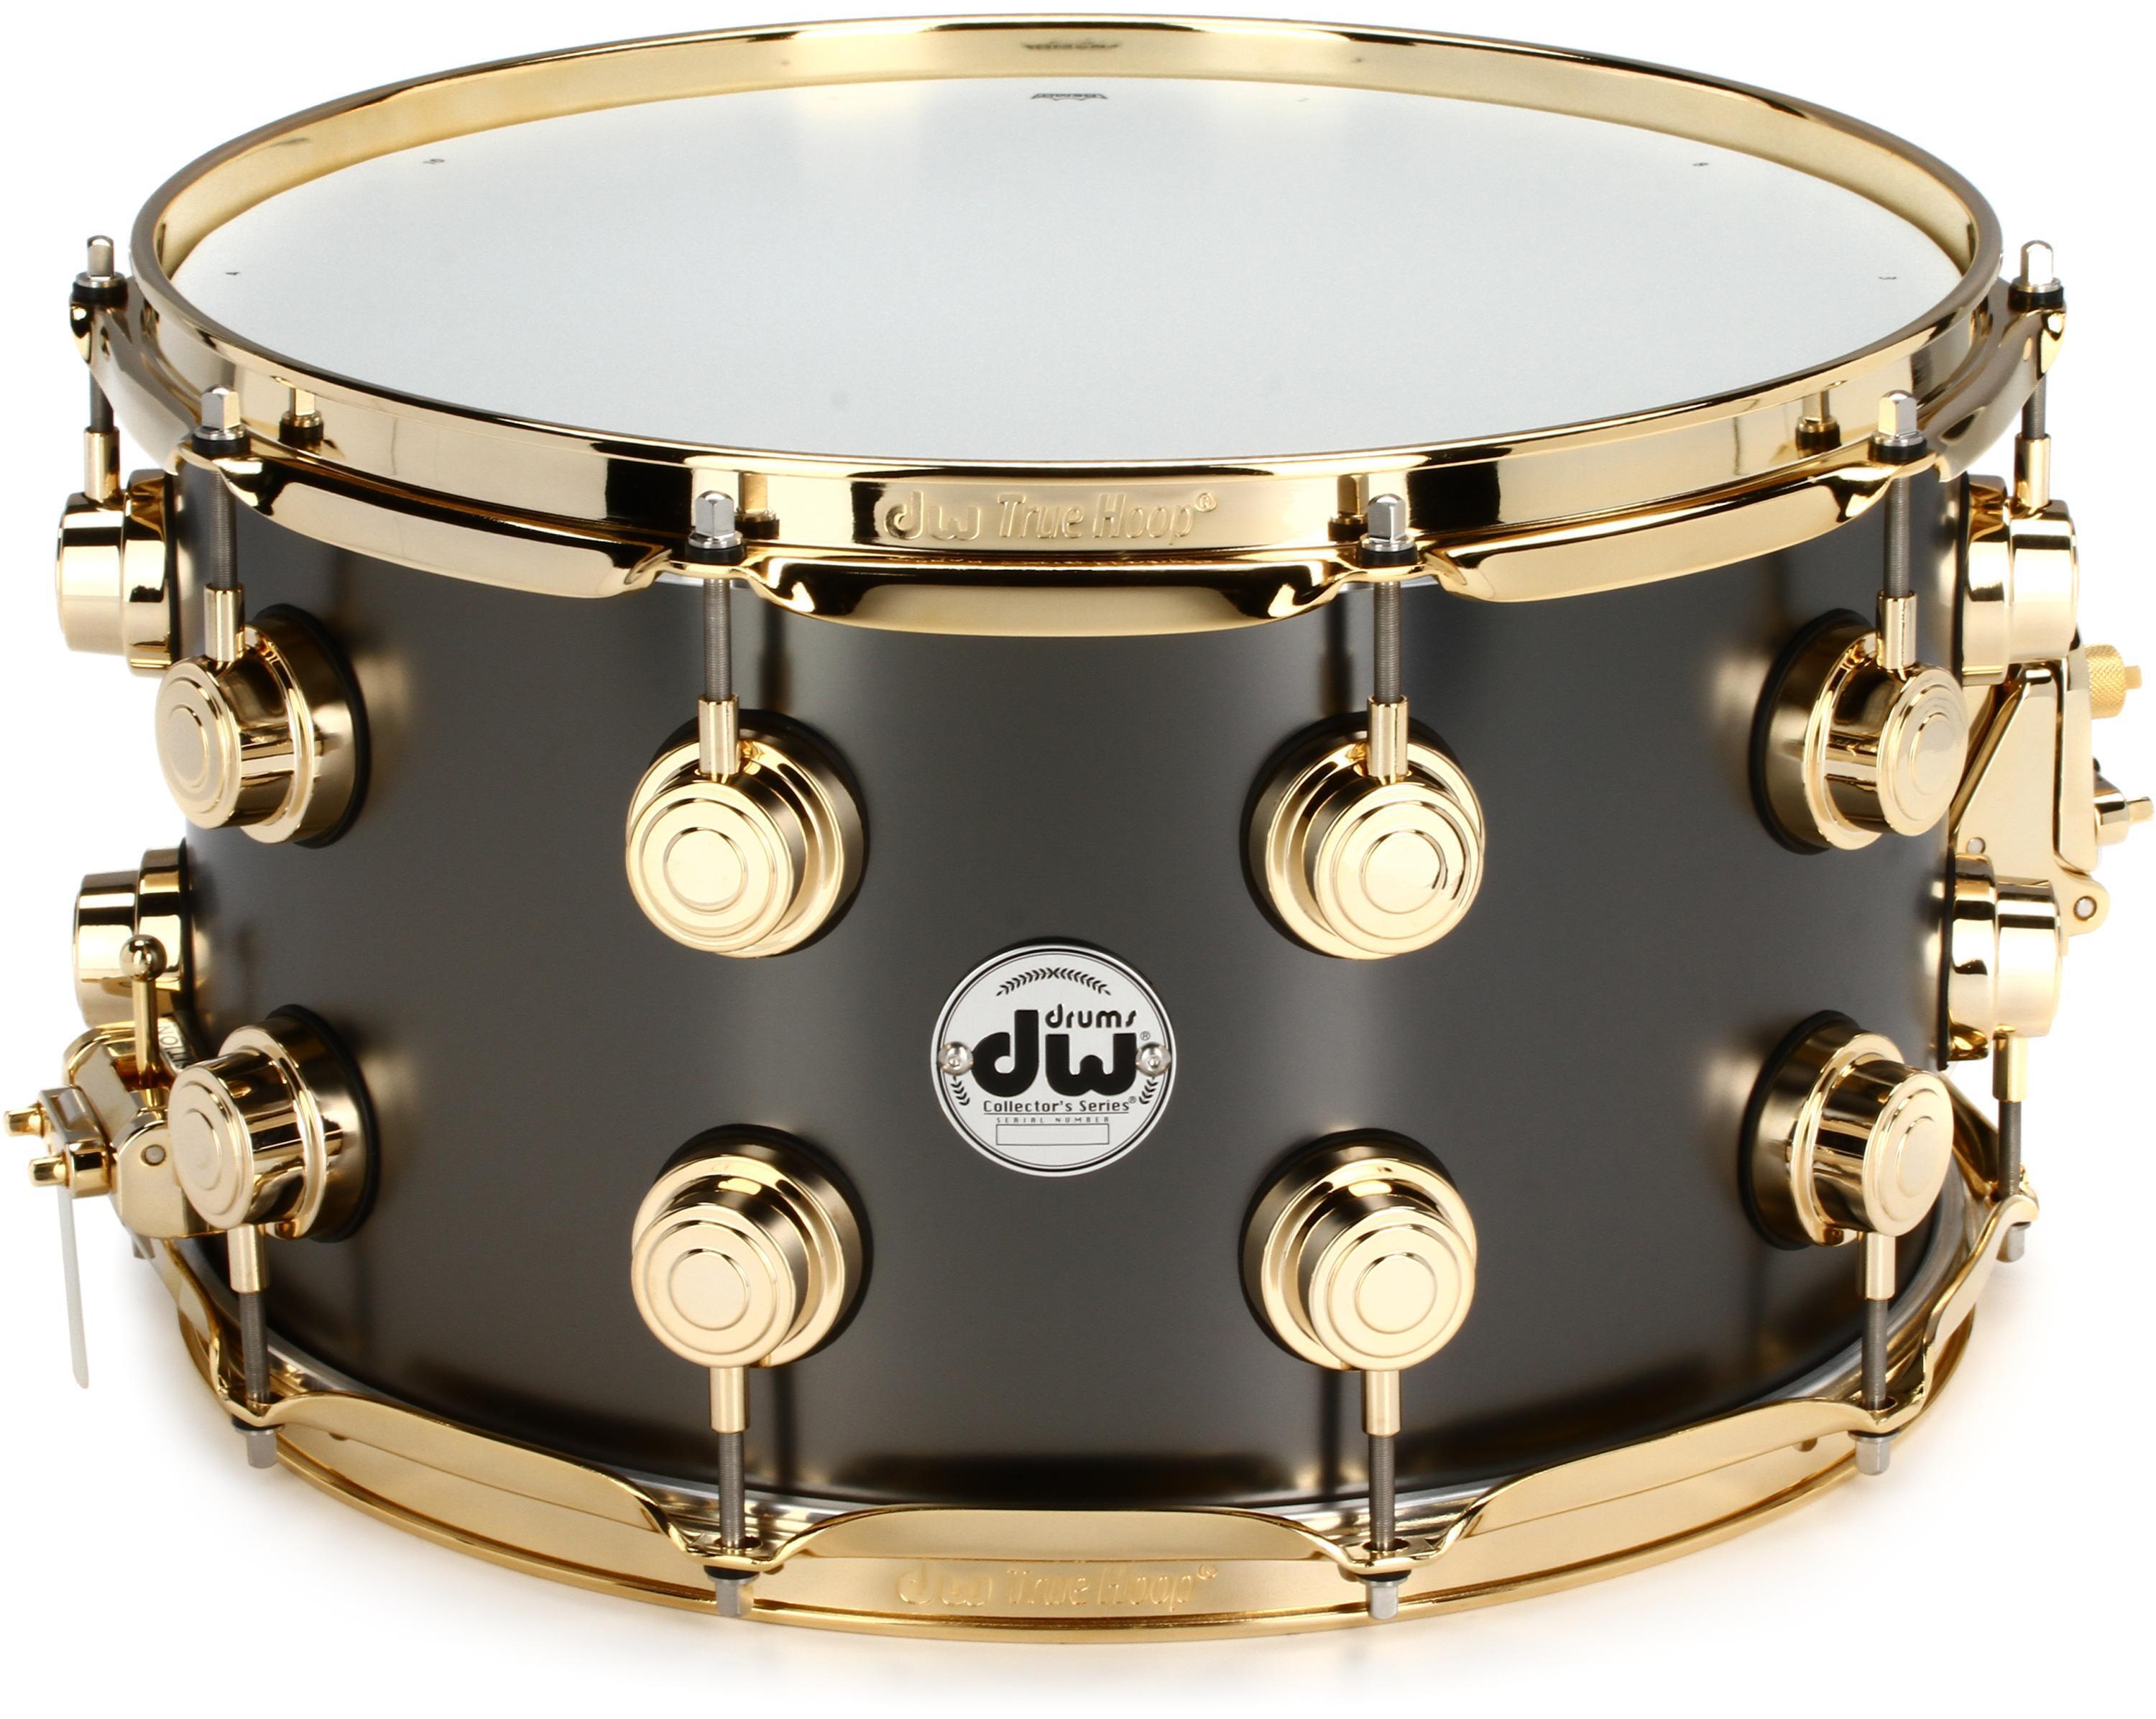 Collector's Series Metal Snare Drum - 8 x 14-inch - Satin Black